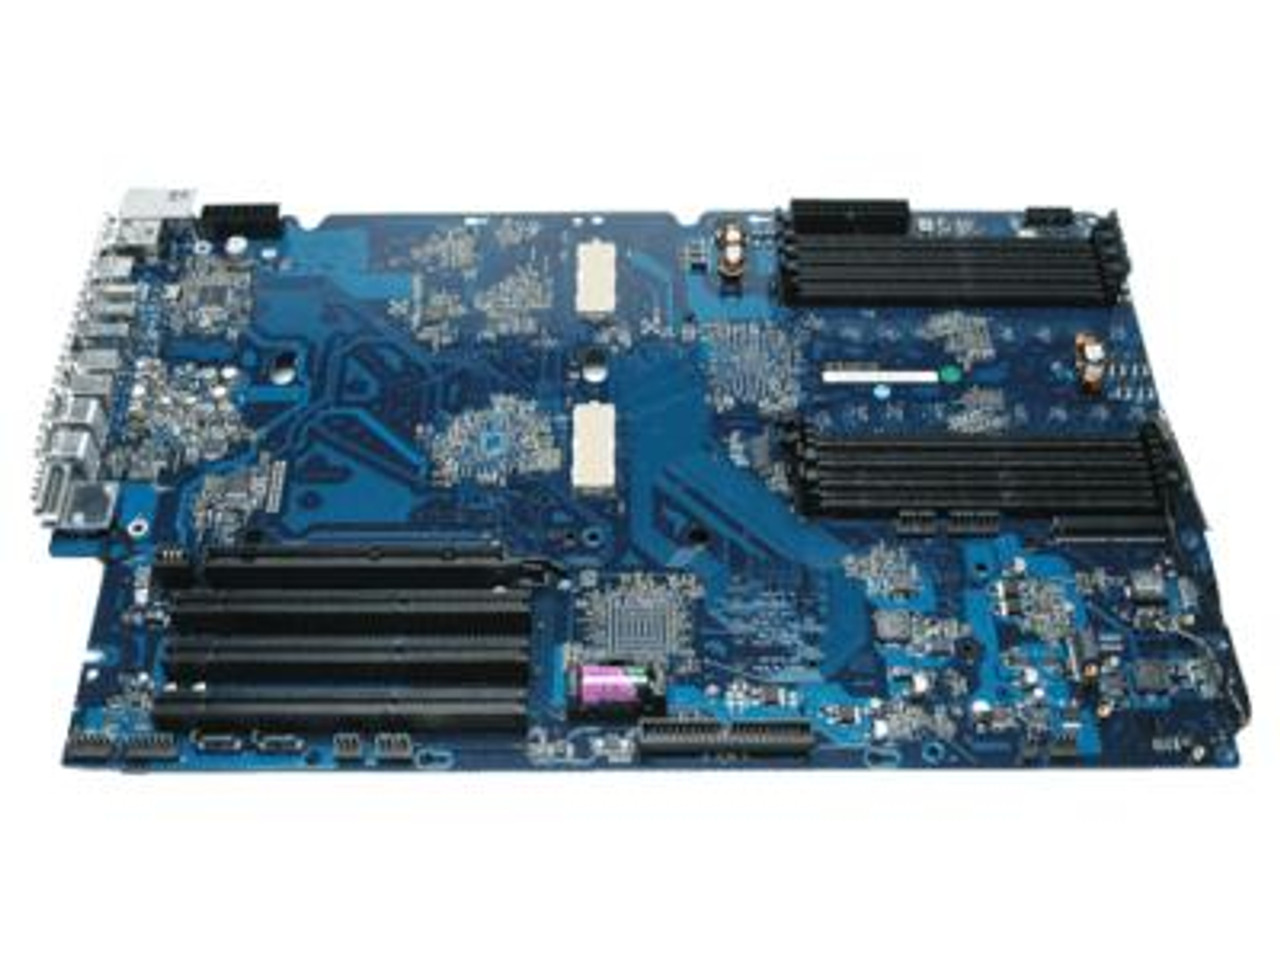 661-3164 Apple System Board (Motherboard) 2.50GHz CPU for PowerMac G5 June 2004 All-In-One (Refurbished)